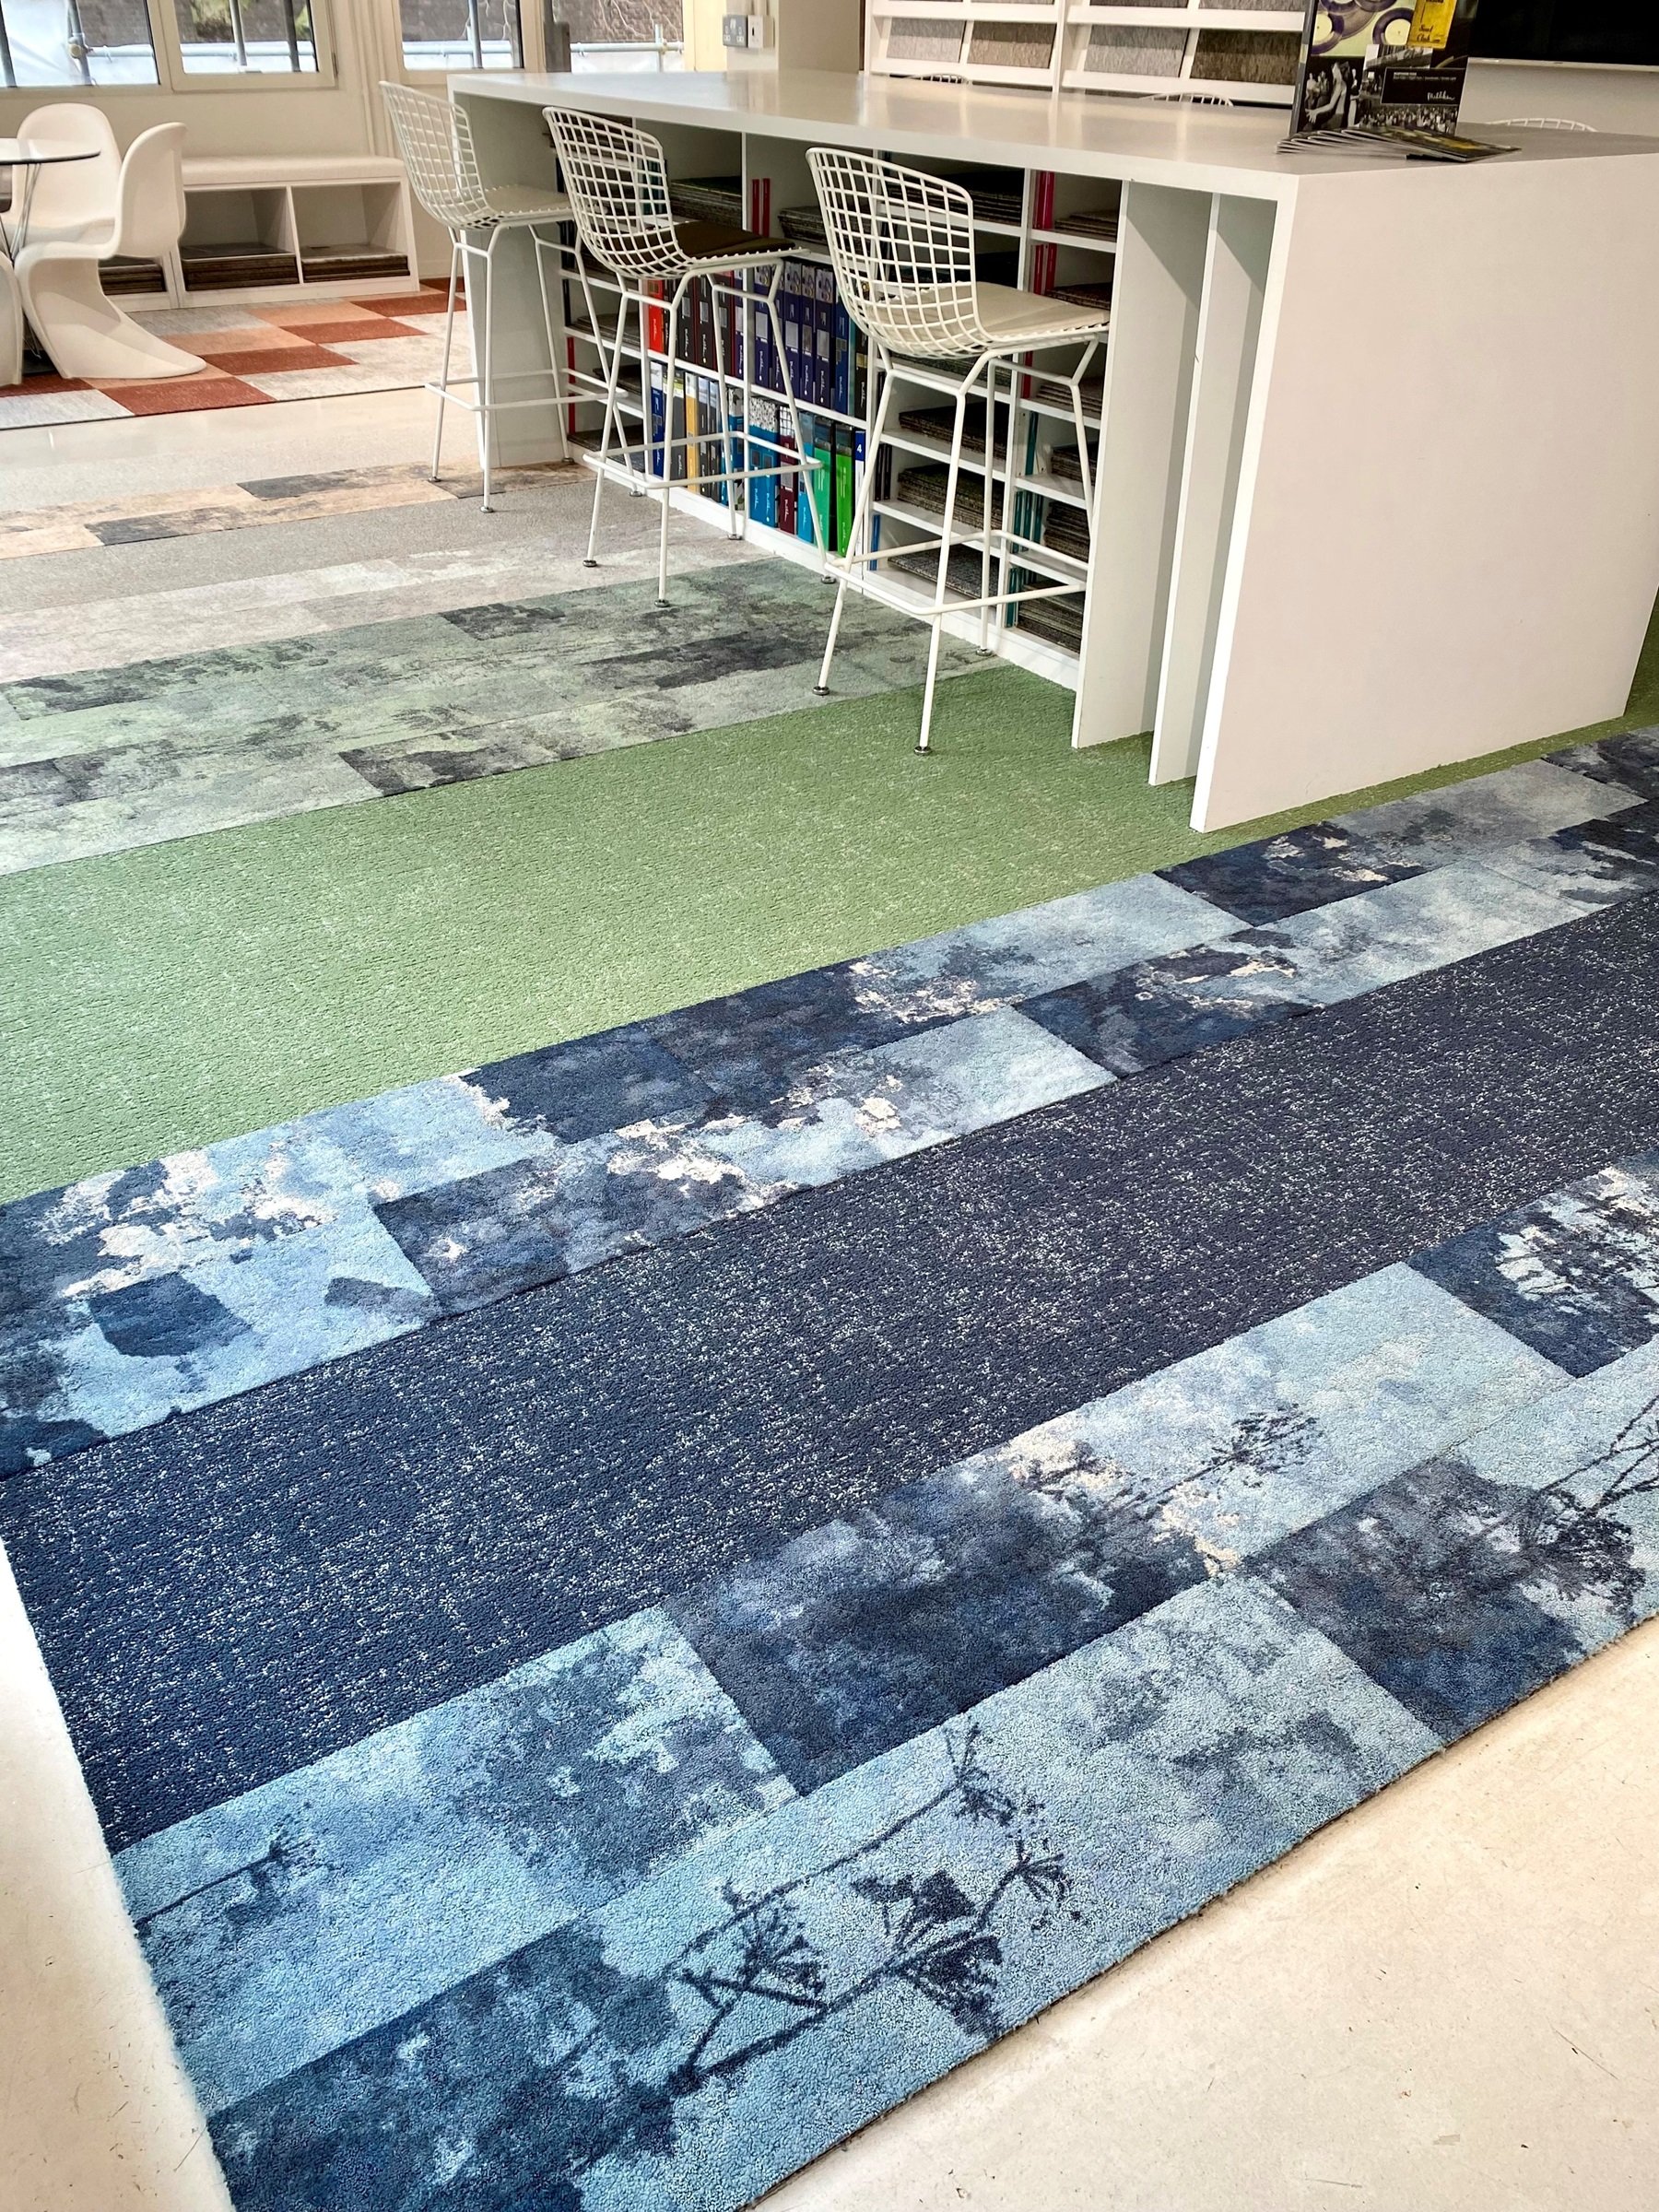 Milliken's London showroom with coloured carpet tiles with nature motifs 